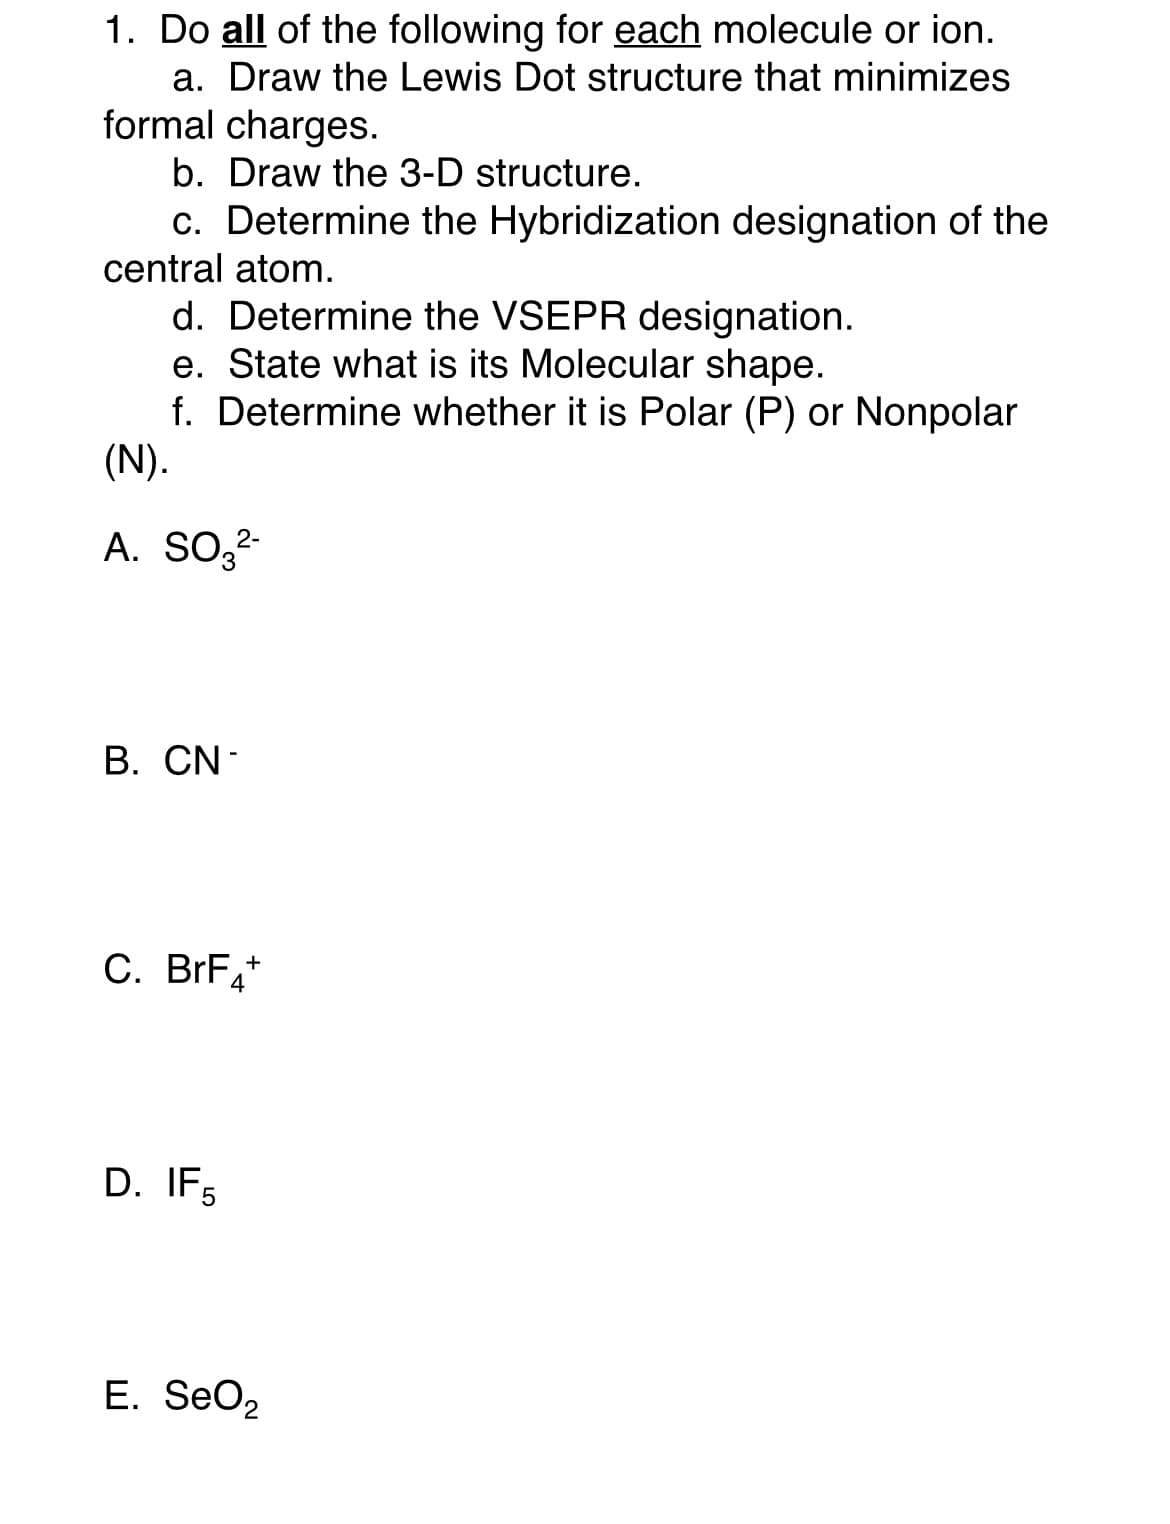 1. Do all of the following for each molecule or ion.
a. Draw the Lewis Dot structure that minimizes
formal charges.
b. Draw the 3-D structure.
c. Determine the Hybridization designation of the
central atom.
d. Determine the VSEPR designation.
e. State what is its Molecular shape.
f. Determine whether it is Polar (P) or Nonpolar
(N).
A. SO3²-
B. CN-
C. BrF4+
D. IF5
E. SeO2
